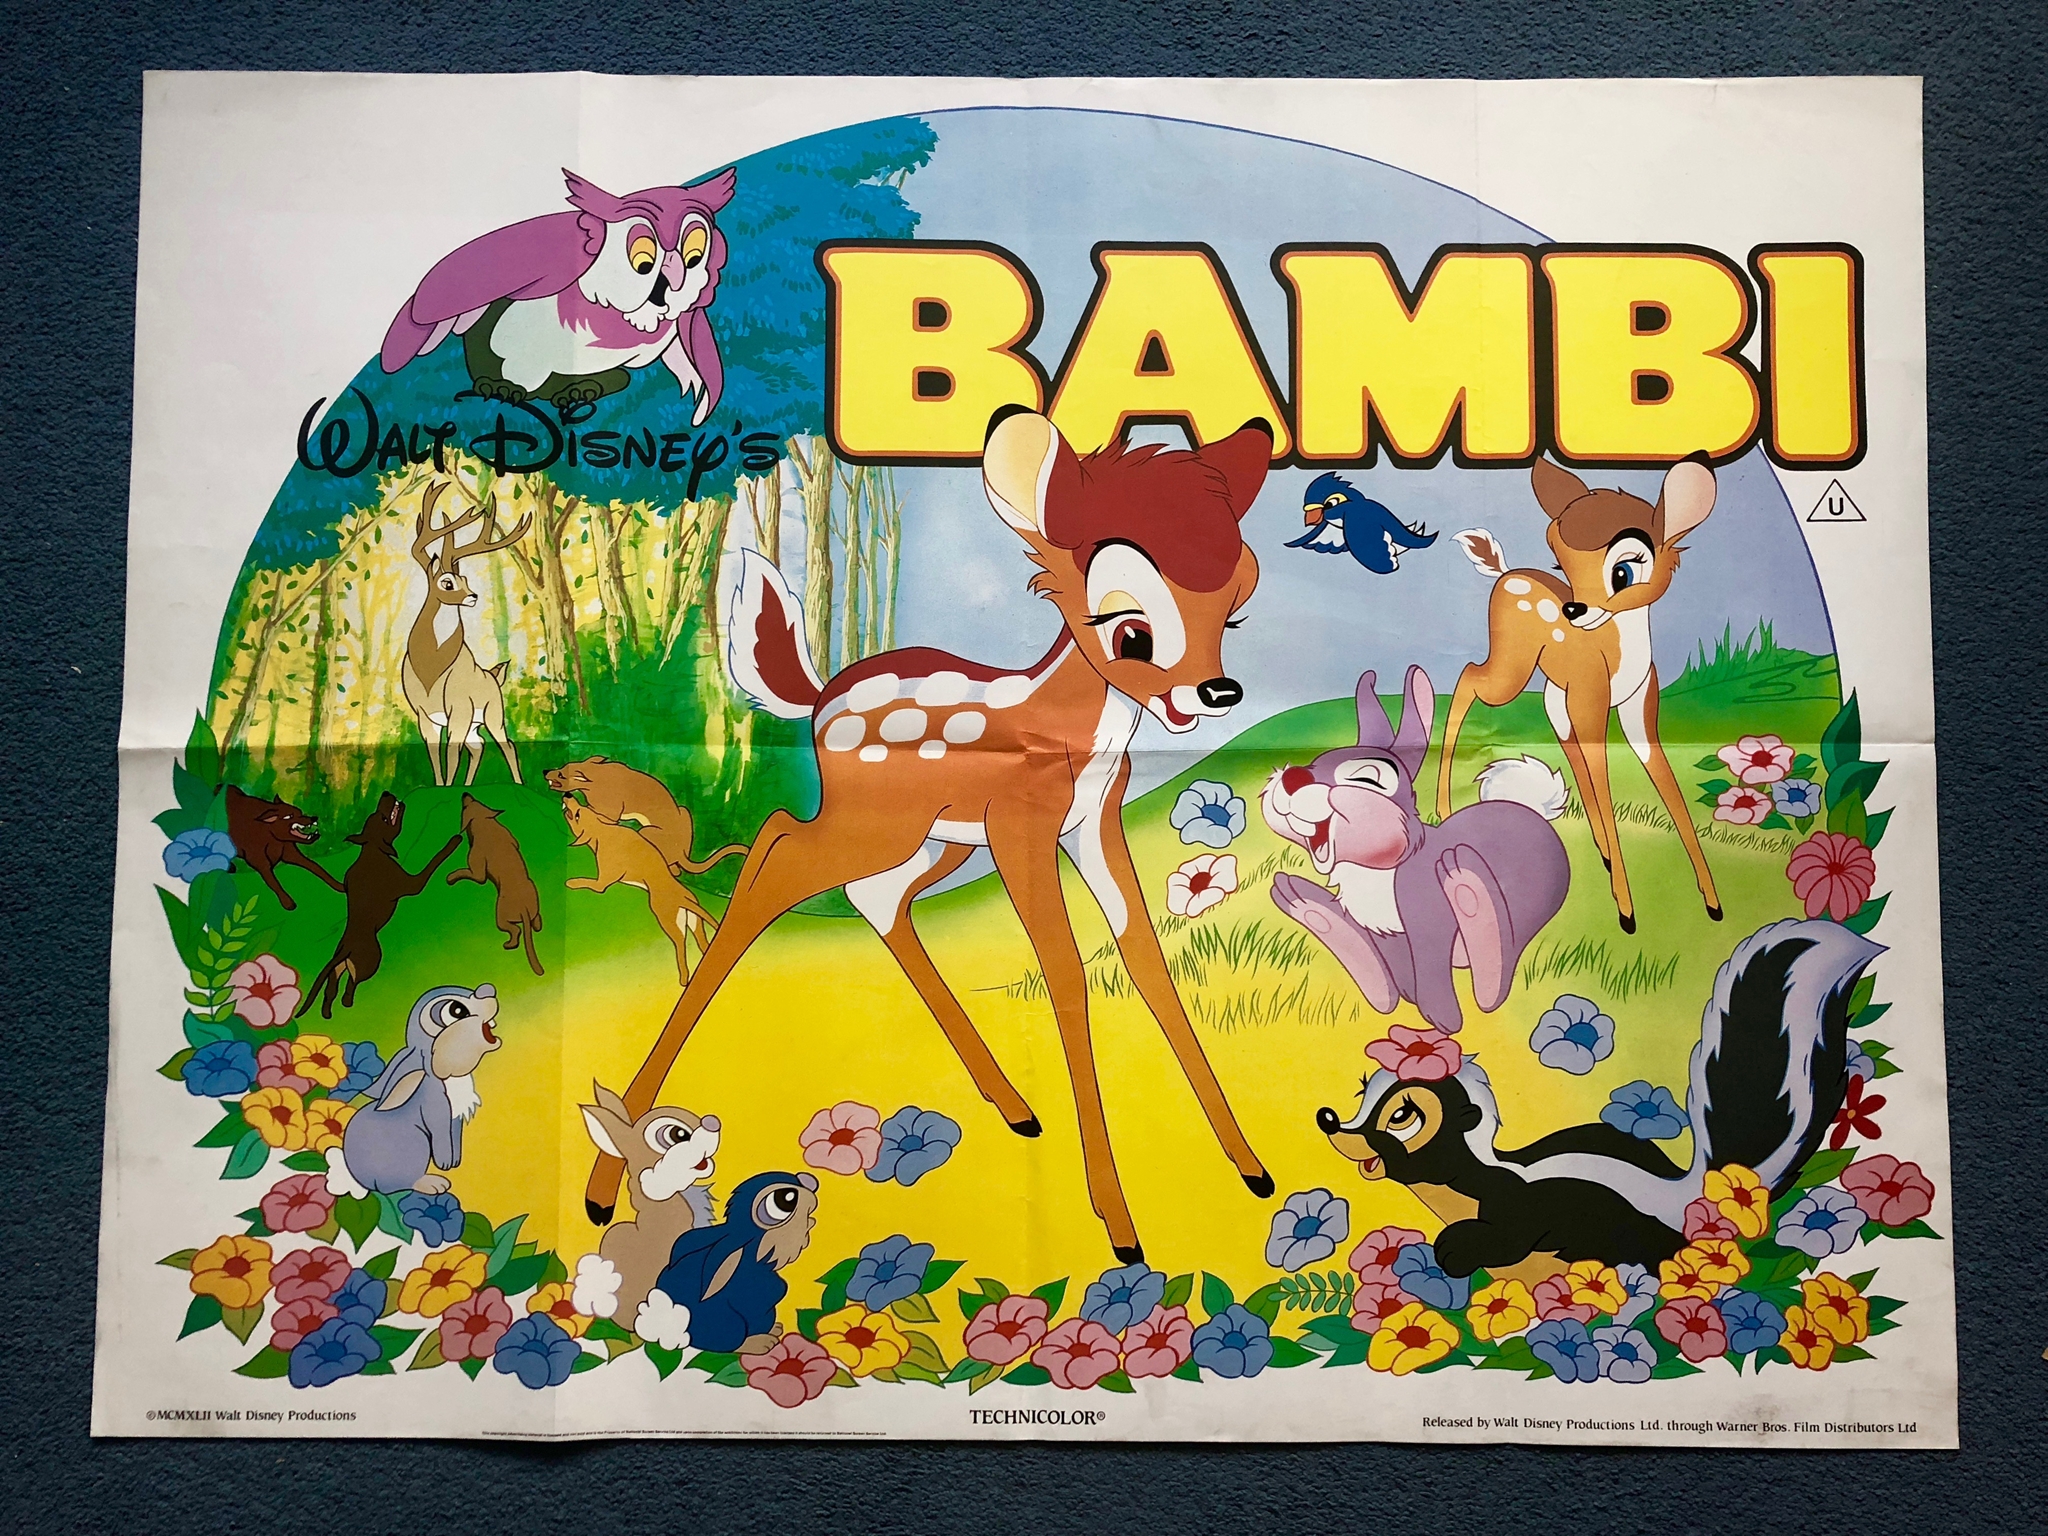 BAMBI (1980's) - UK Quad Film Poster - 30" x 40" (76 x 101.5 cm) - Folded (as issued) - Very Fine